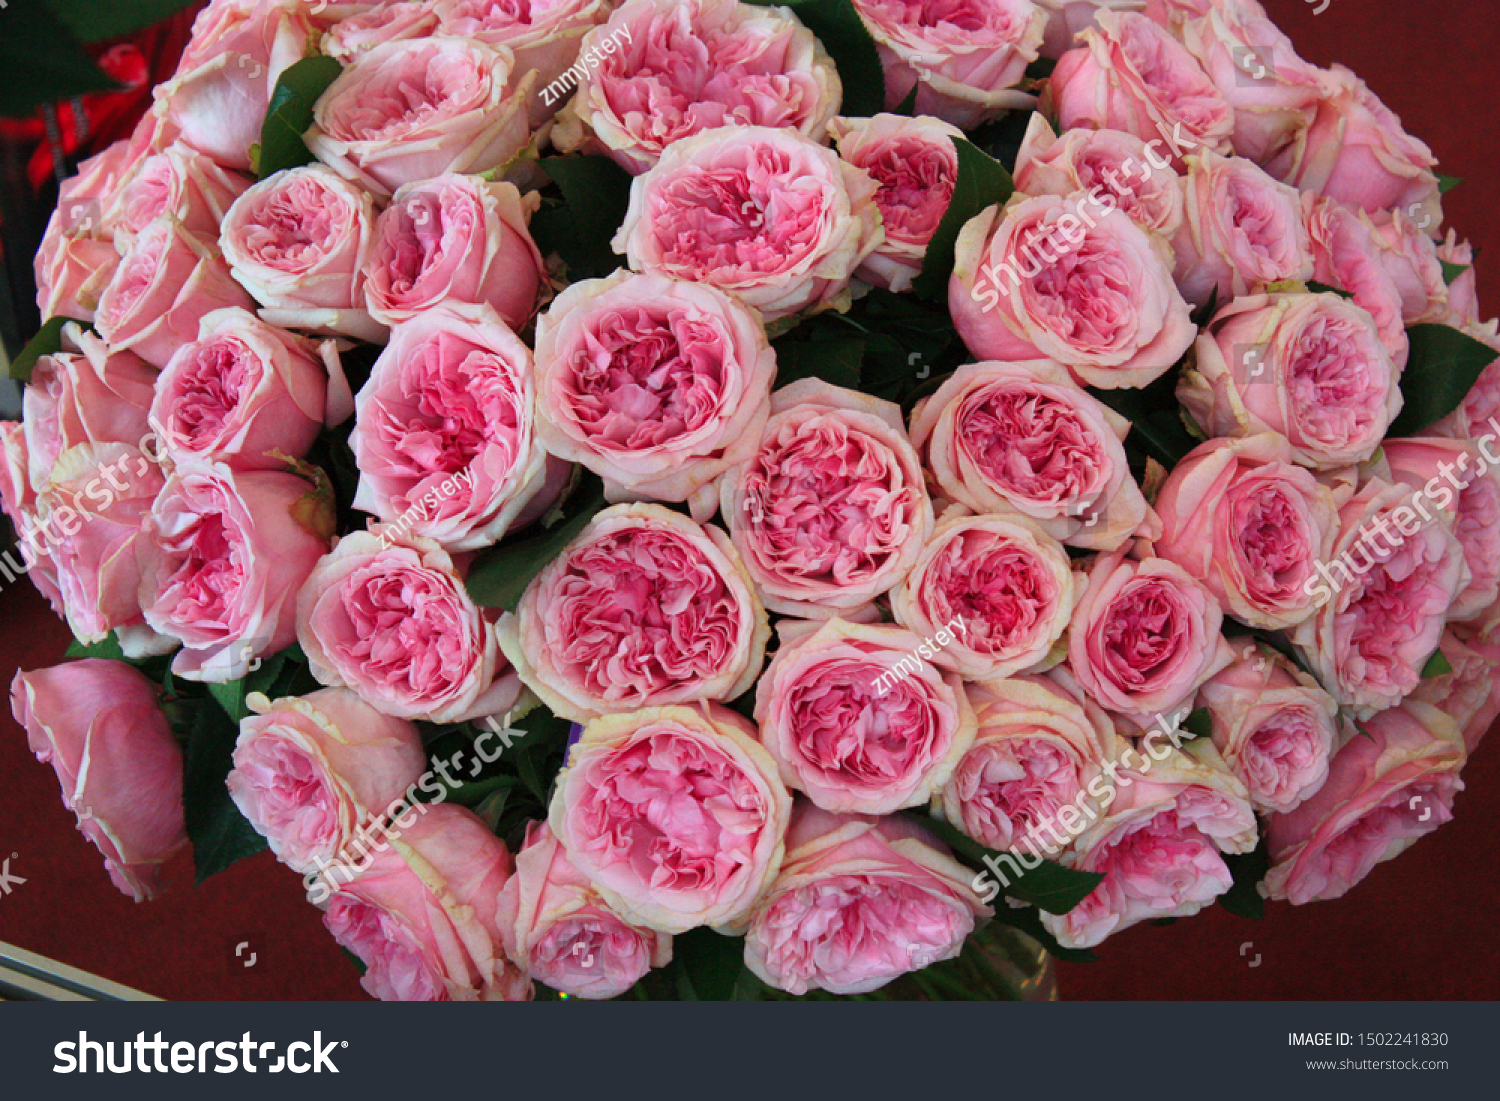 Big Bouquet Pink English Peony Roses Stock Photo Shutterstock